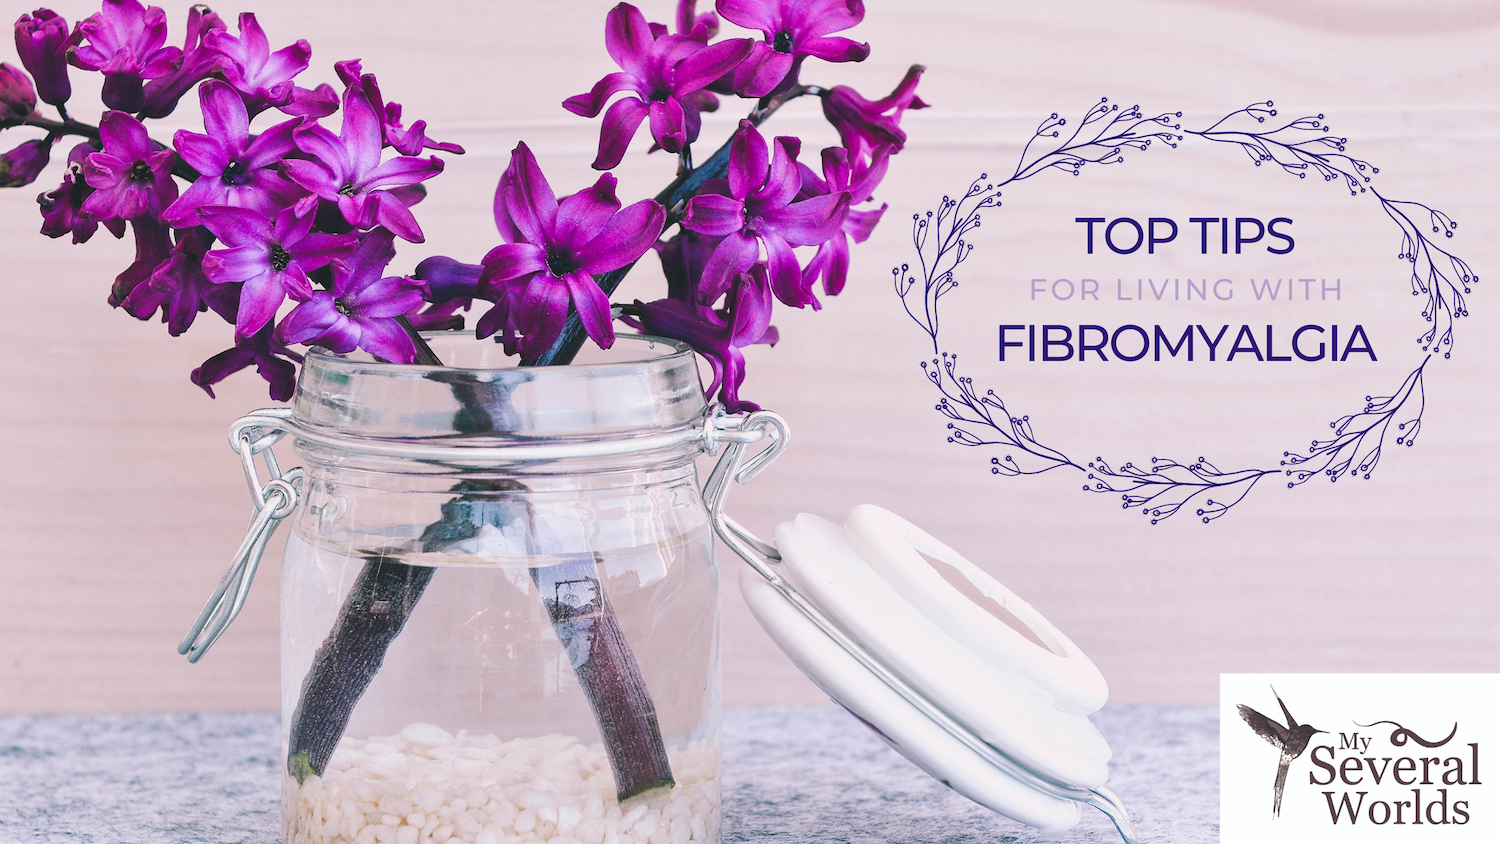 Coping Tips for Living with Fibro